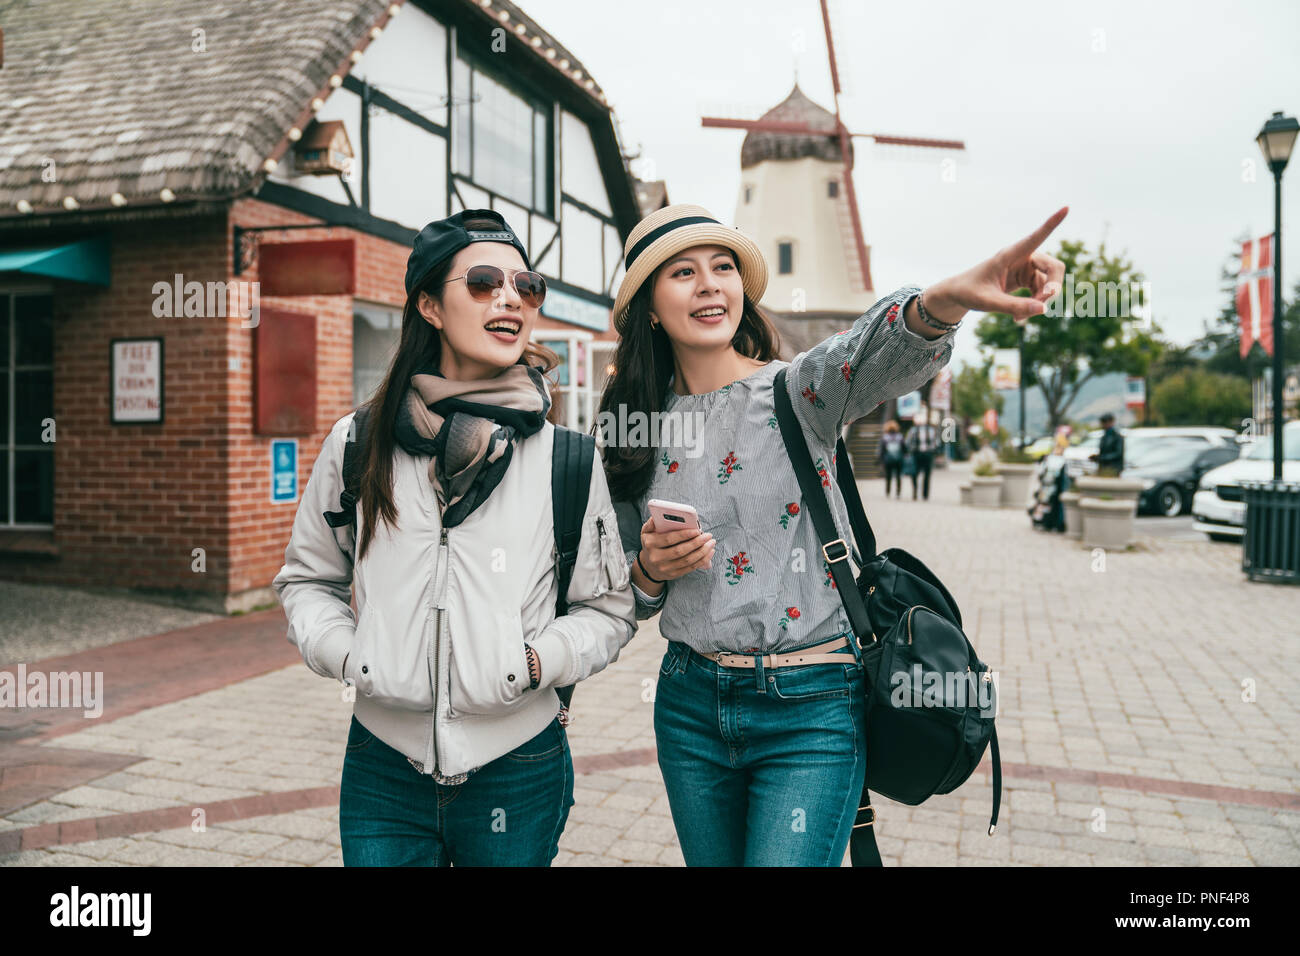 young sisters traveling together in a old town and one is pointing to somewhere ahead joyfully. Stock Photo